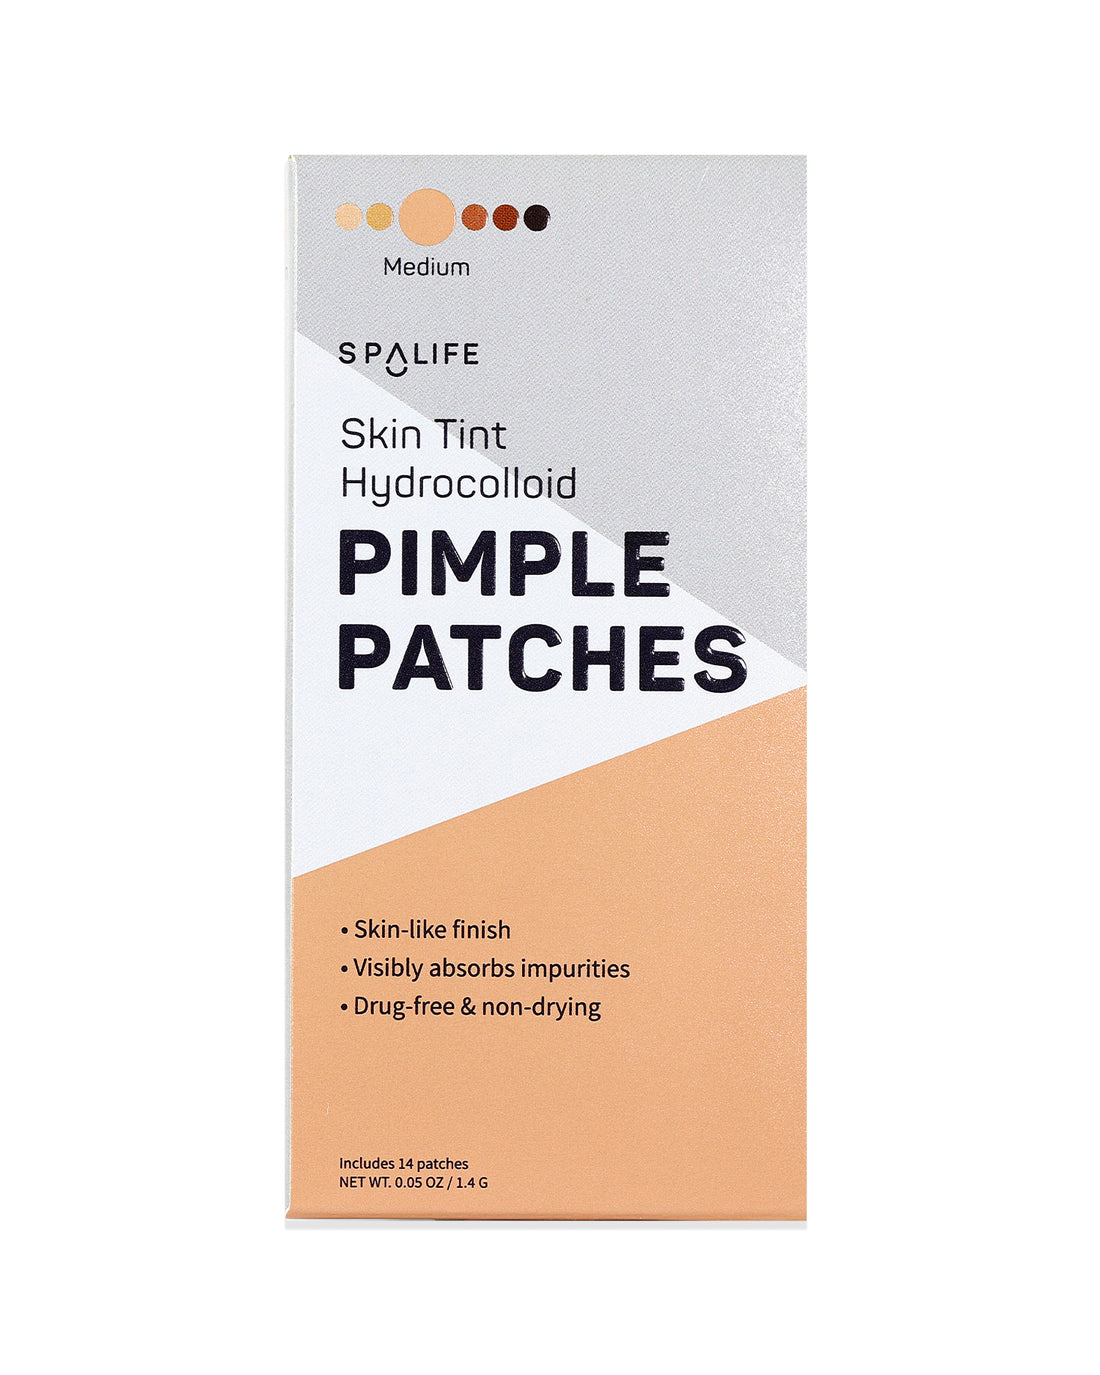 Skin_tint_pimple_patches_packe-326